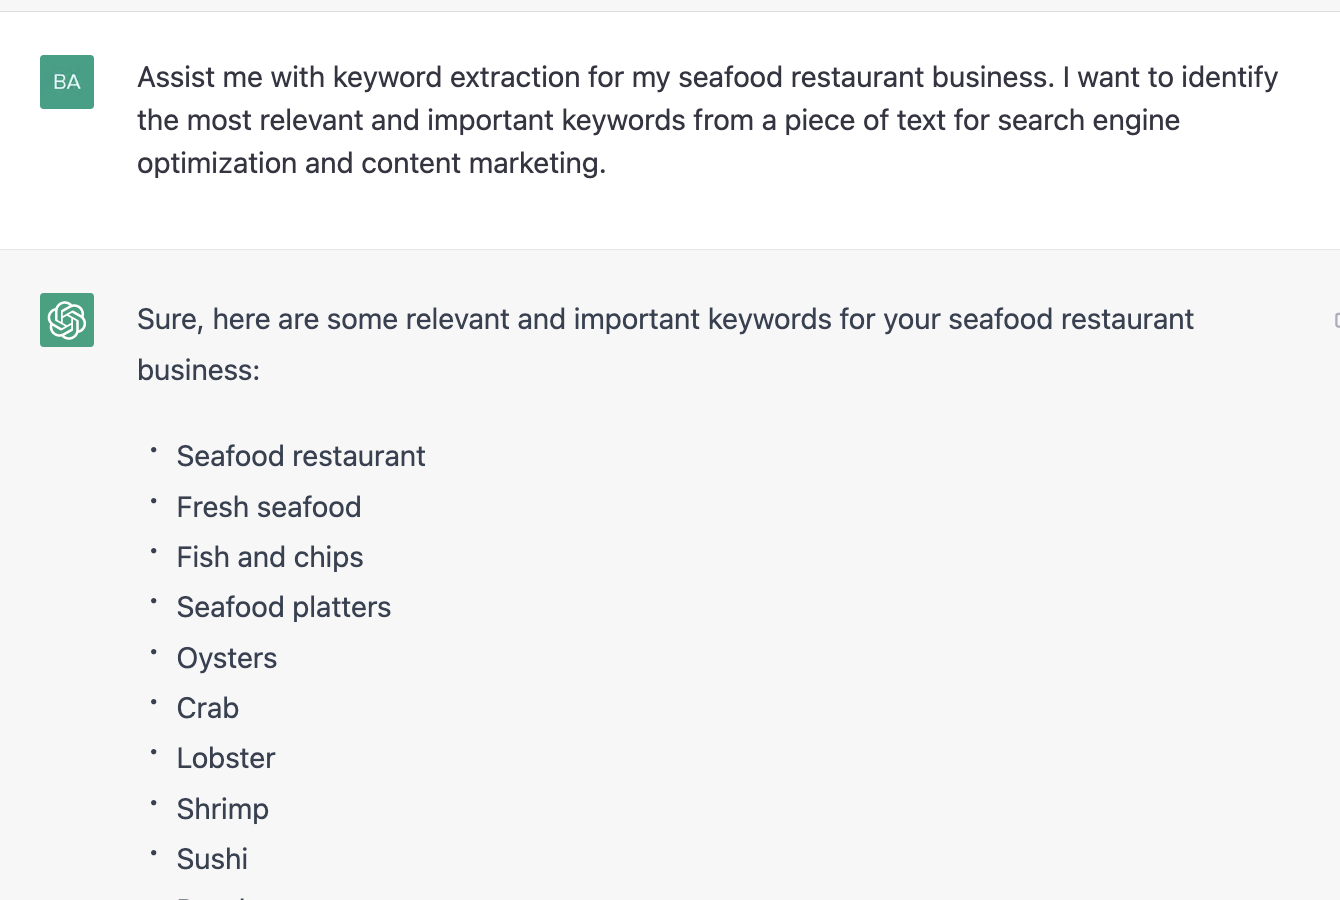 ChatGPT prompt about important keywords for seafood restaurant business